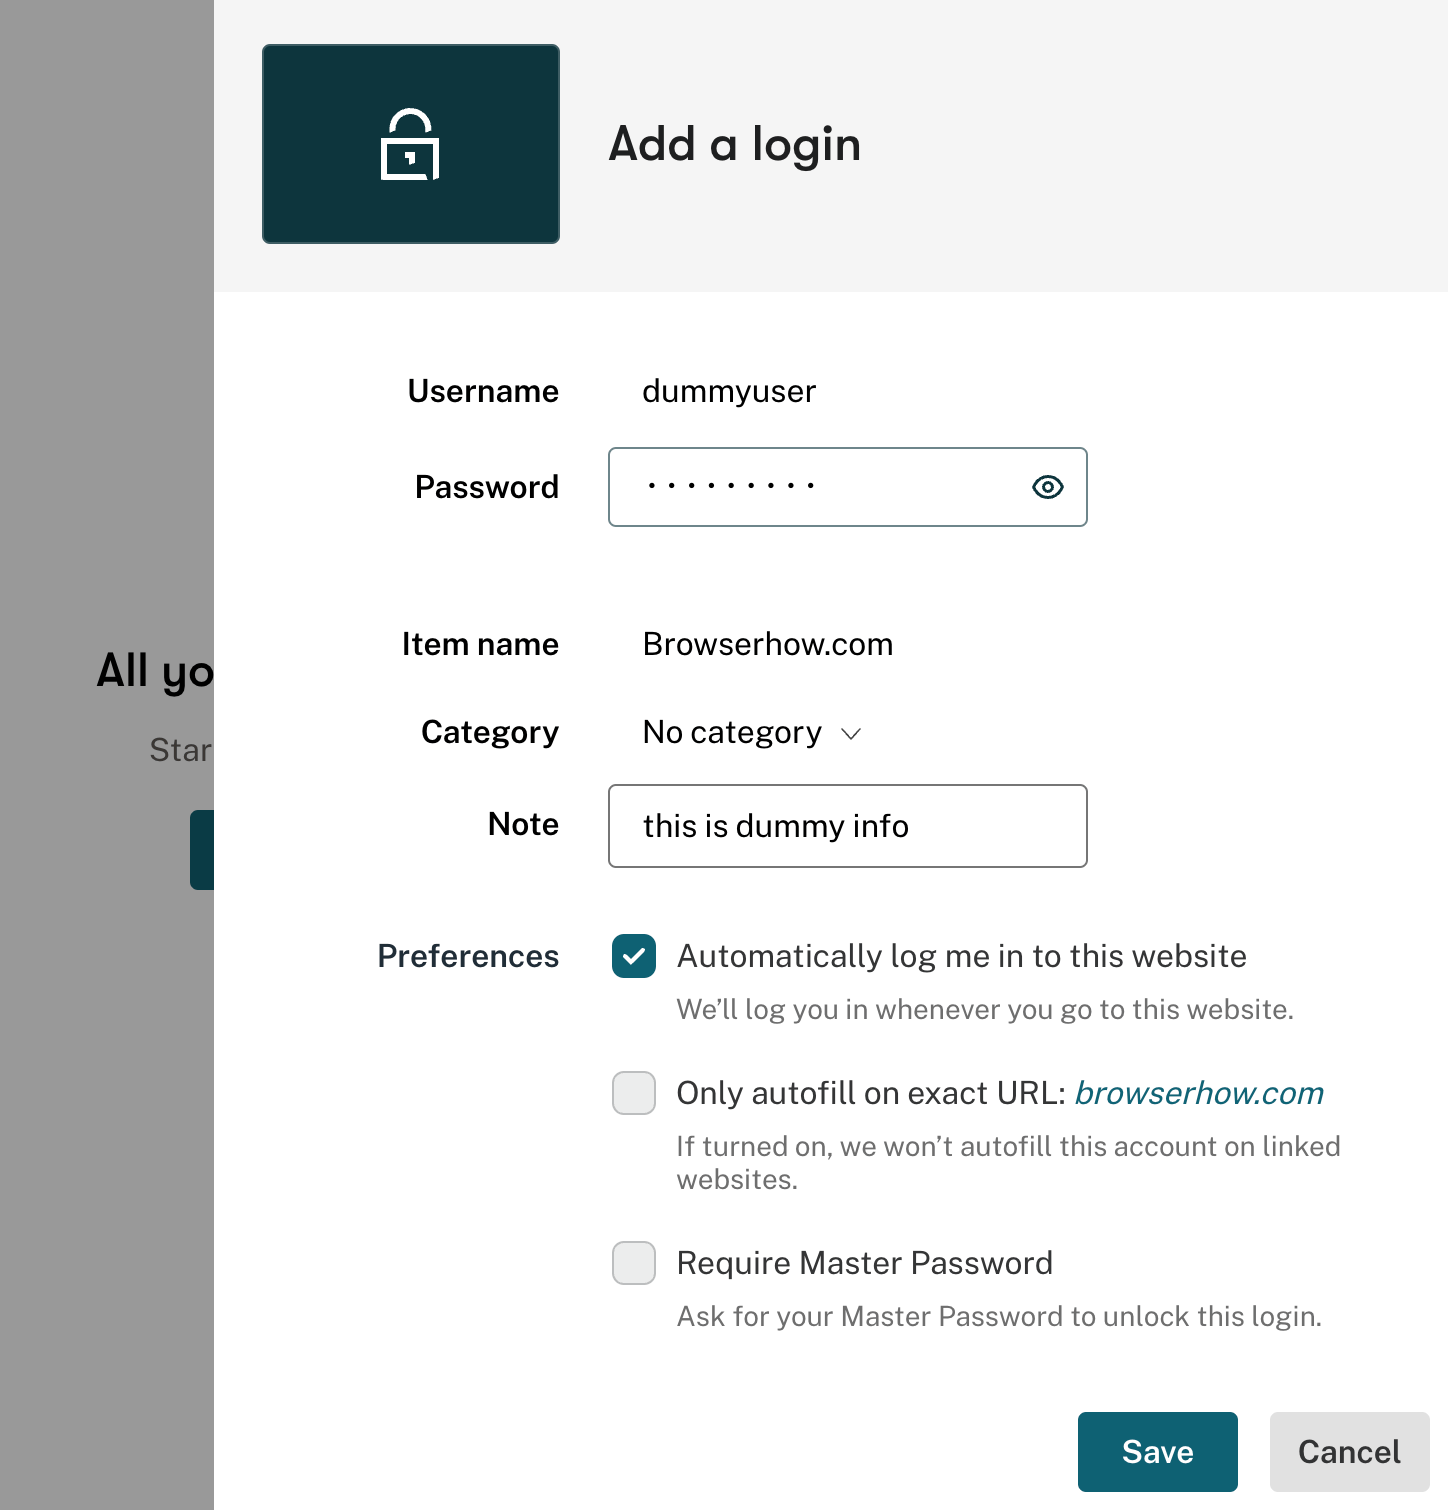 Add a login details to store in Dashlane extension